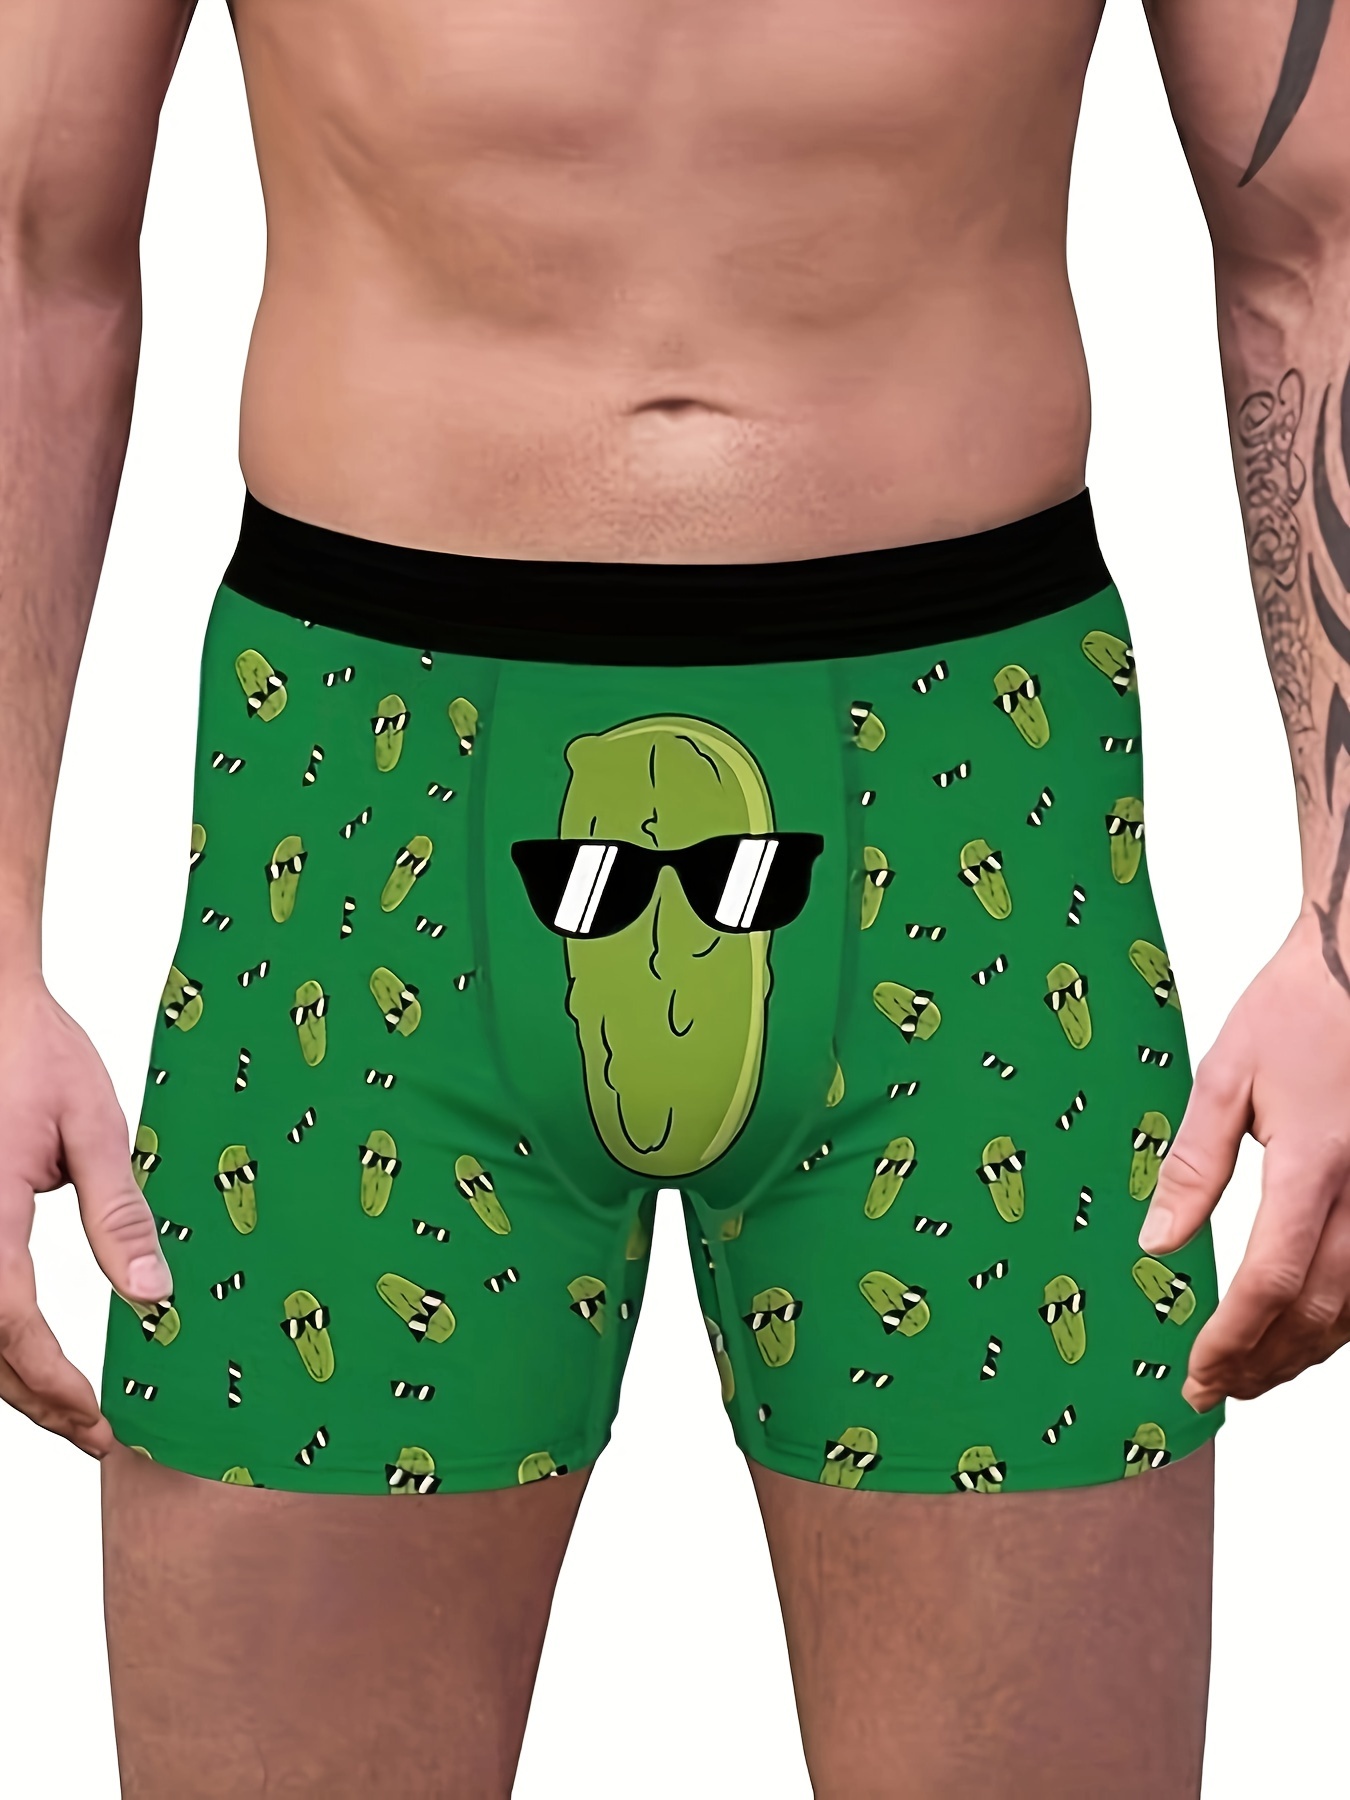 Men's Ice Cream Lick Me Digital Print Boxers Briefs, Novelty Funny Boxers  Trunks, Breathable Comfy Stretchy Underpants, Men's Trendy Underwear